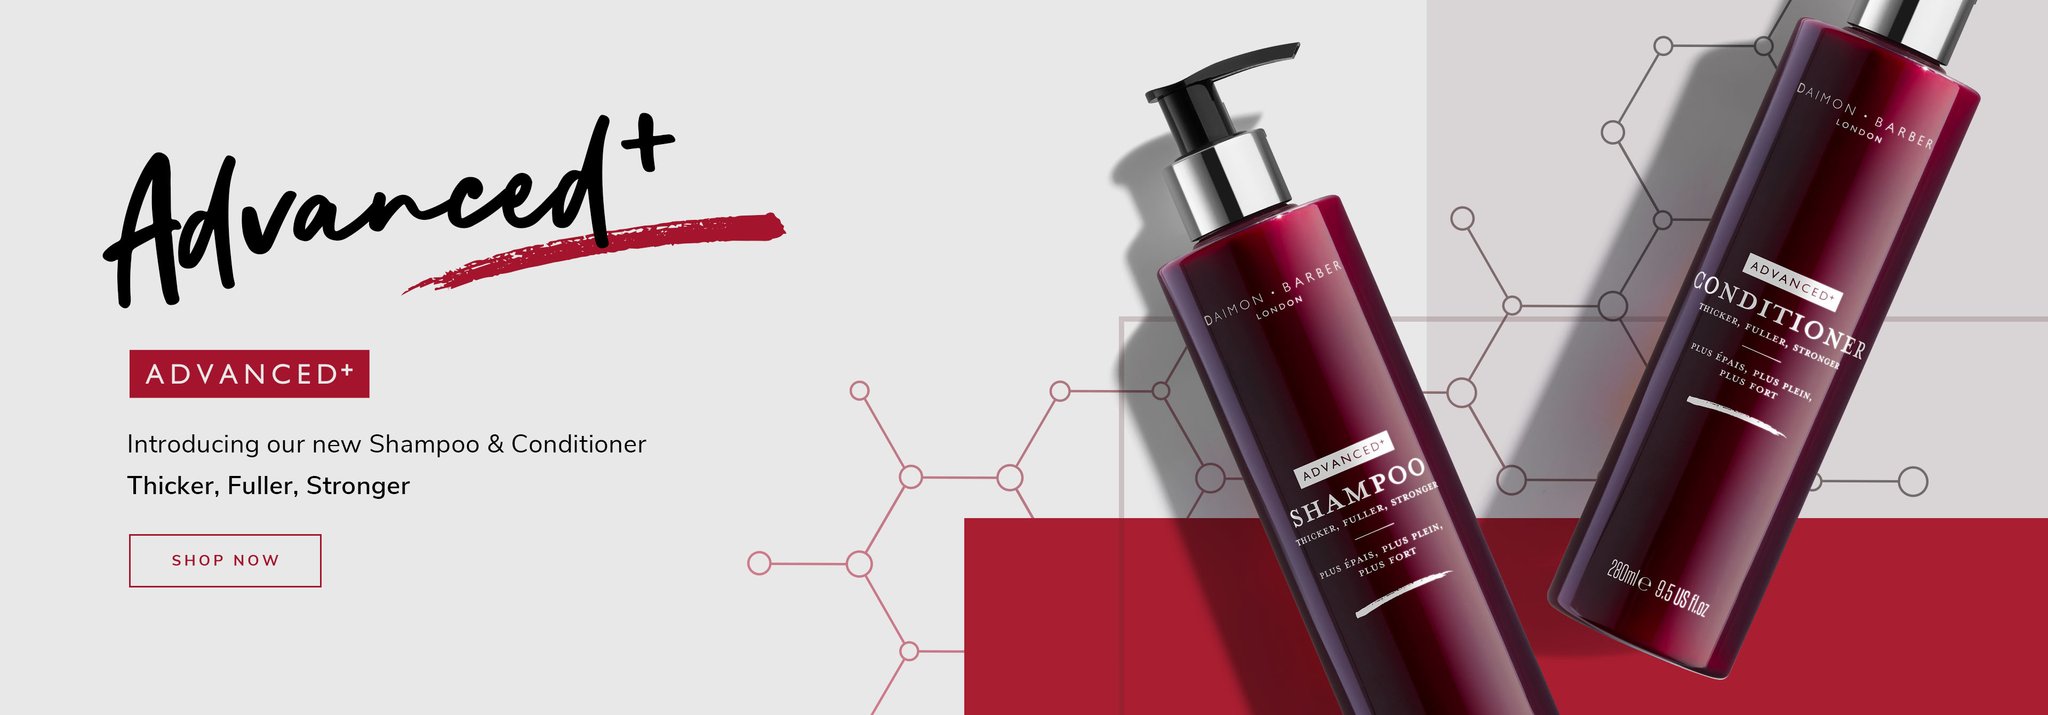 Advanced Plus - Introducing our new Shampoo & Conditioner. Thicker, Fuller, Stronger Hair